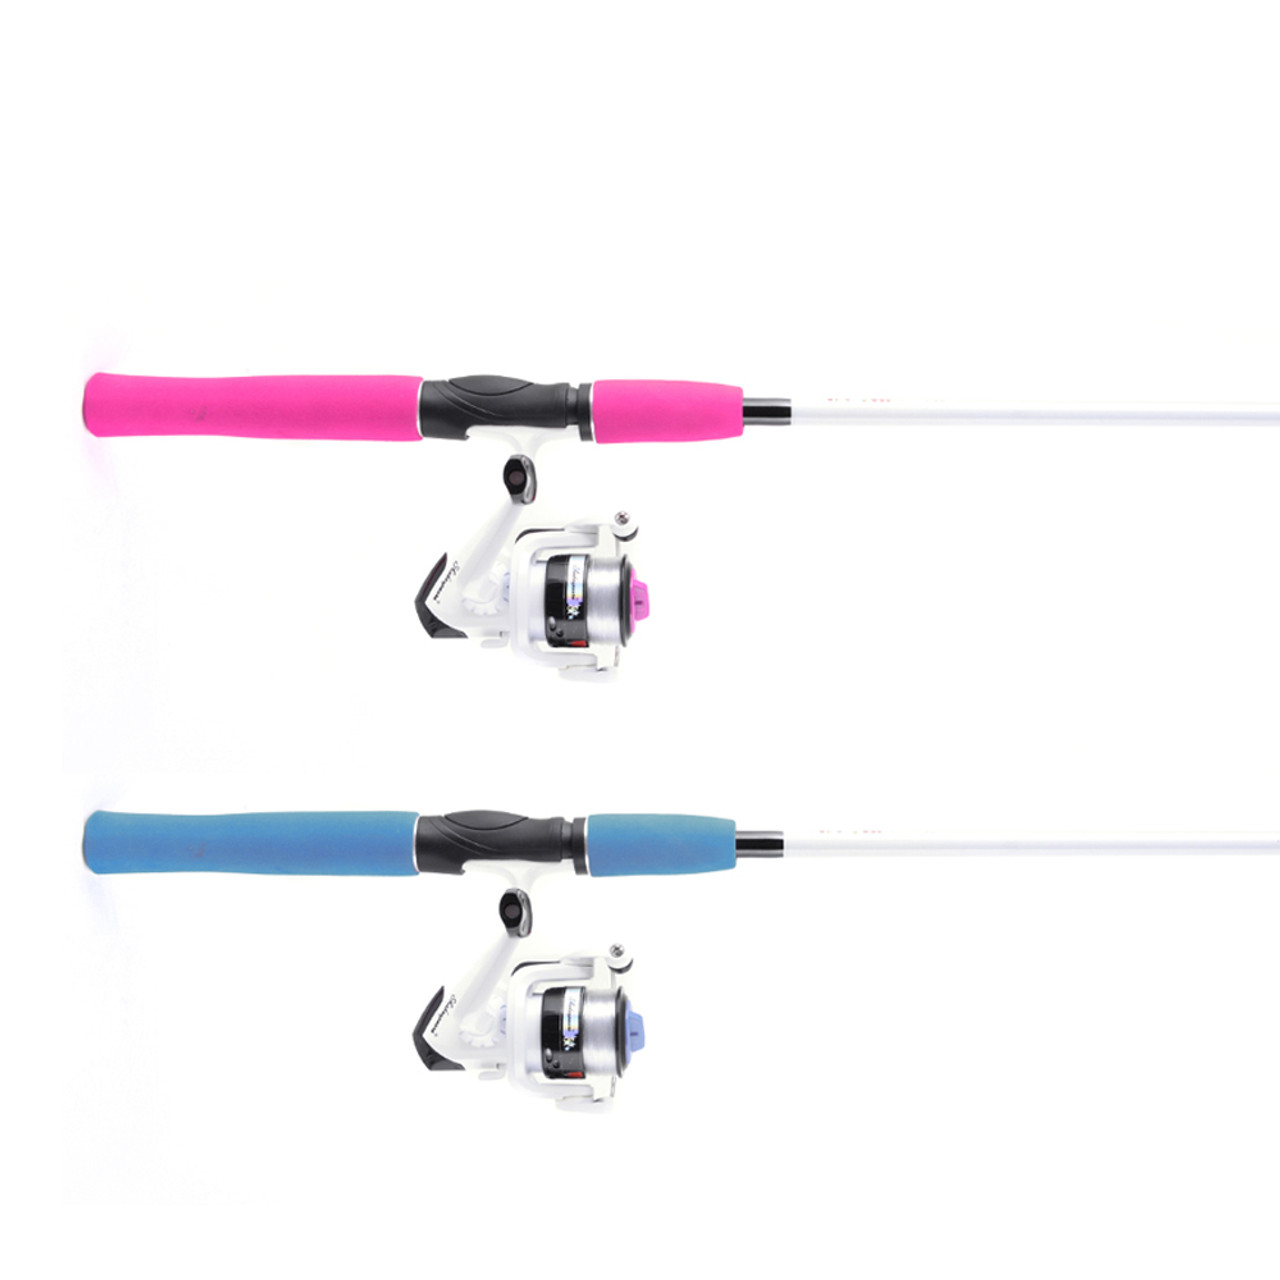 Shakespeare 6 ft 6 in Item Fishing Rod & Reel Combos for sale